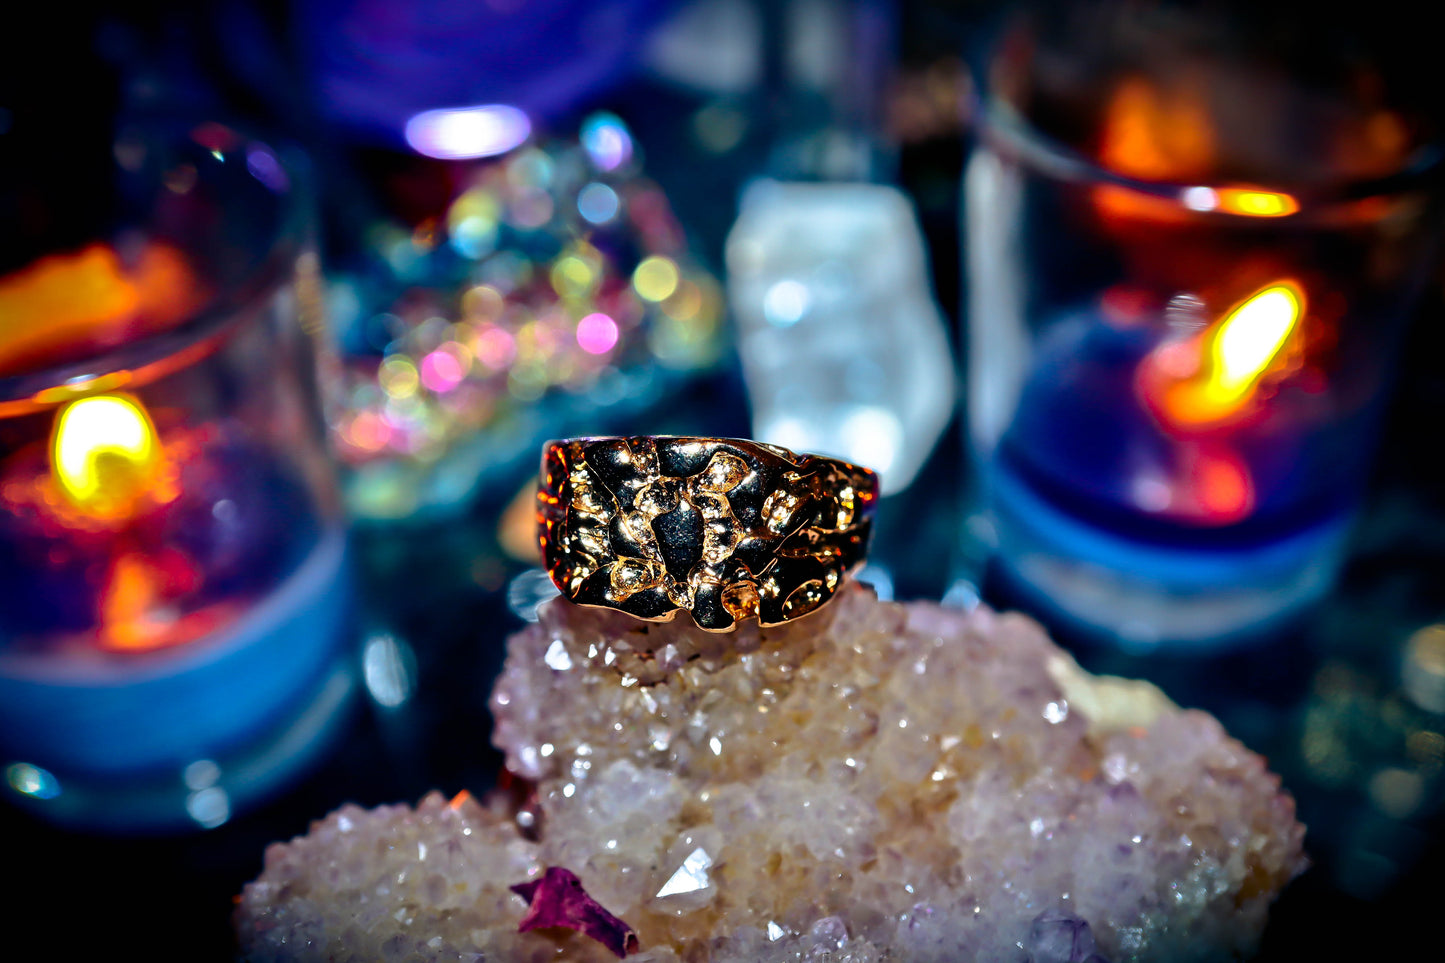 MAGICK MONEY MAGNET! Spell Ring of Ultimate Wealth & Riches ~ Haunted Master Warlock Ring! Wealth $$$